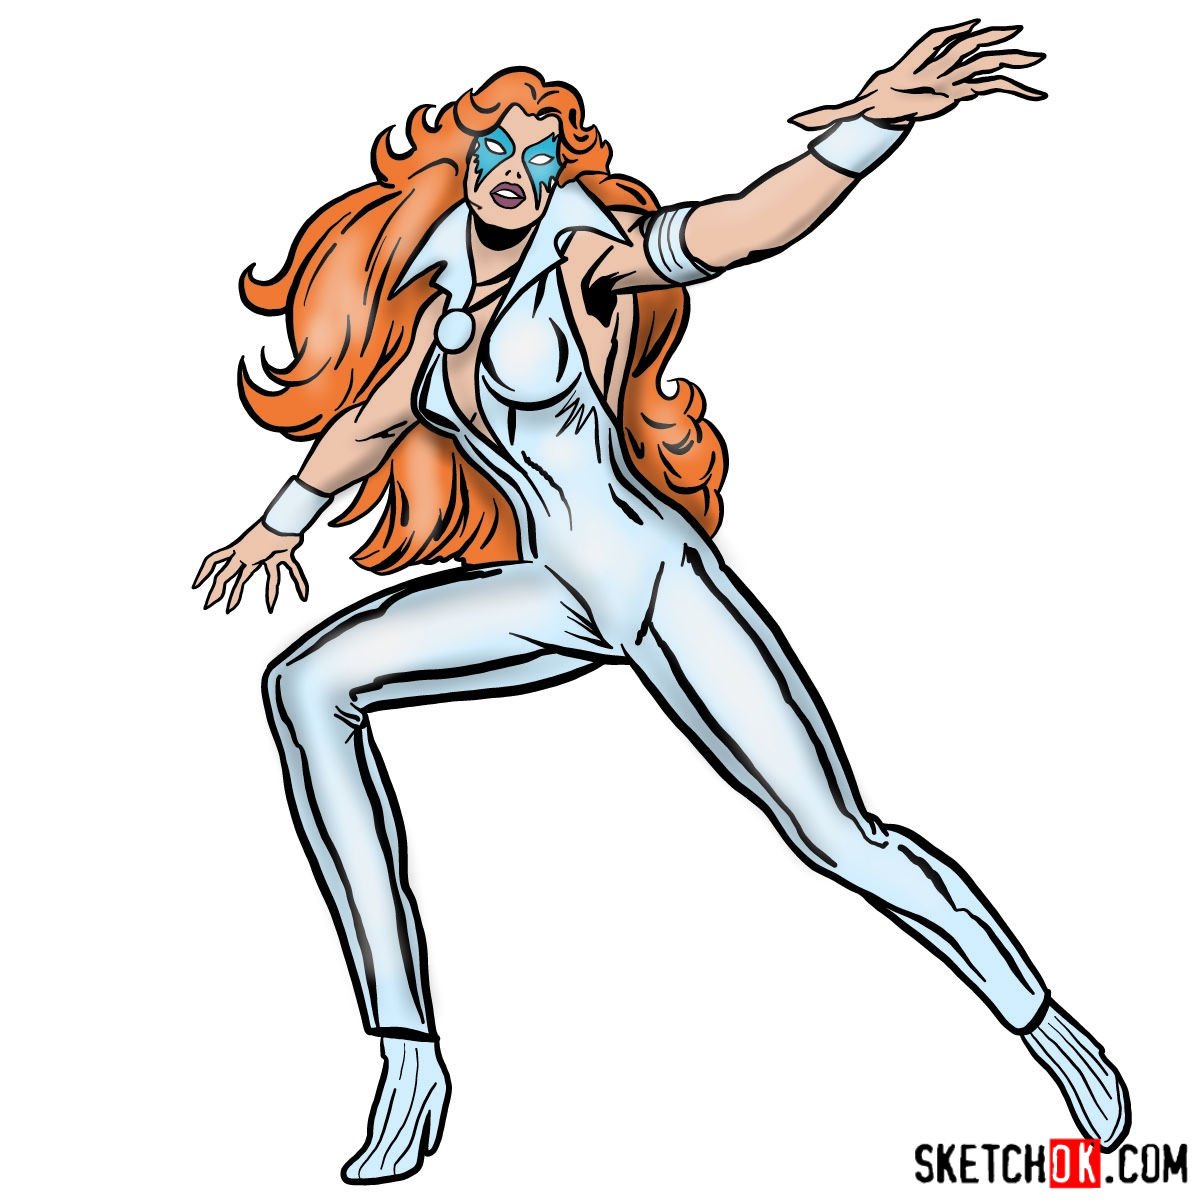 How to draw Dazzler the mutant from X-Men series